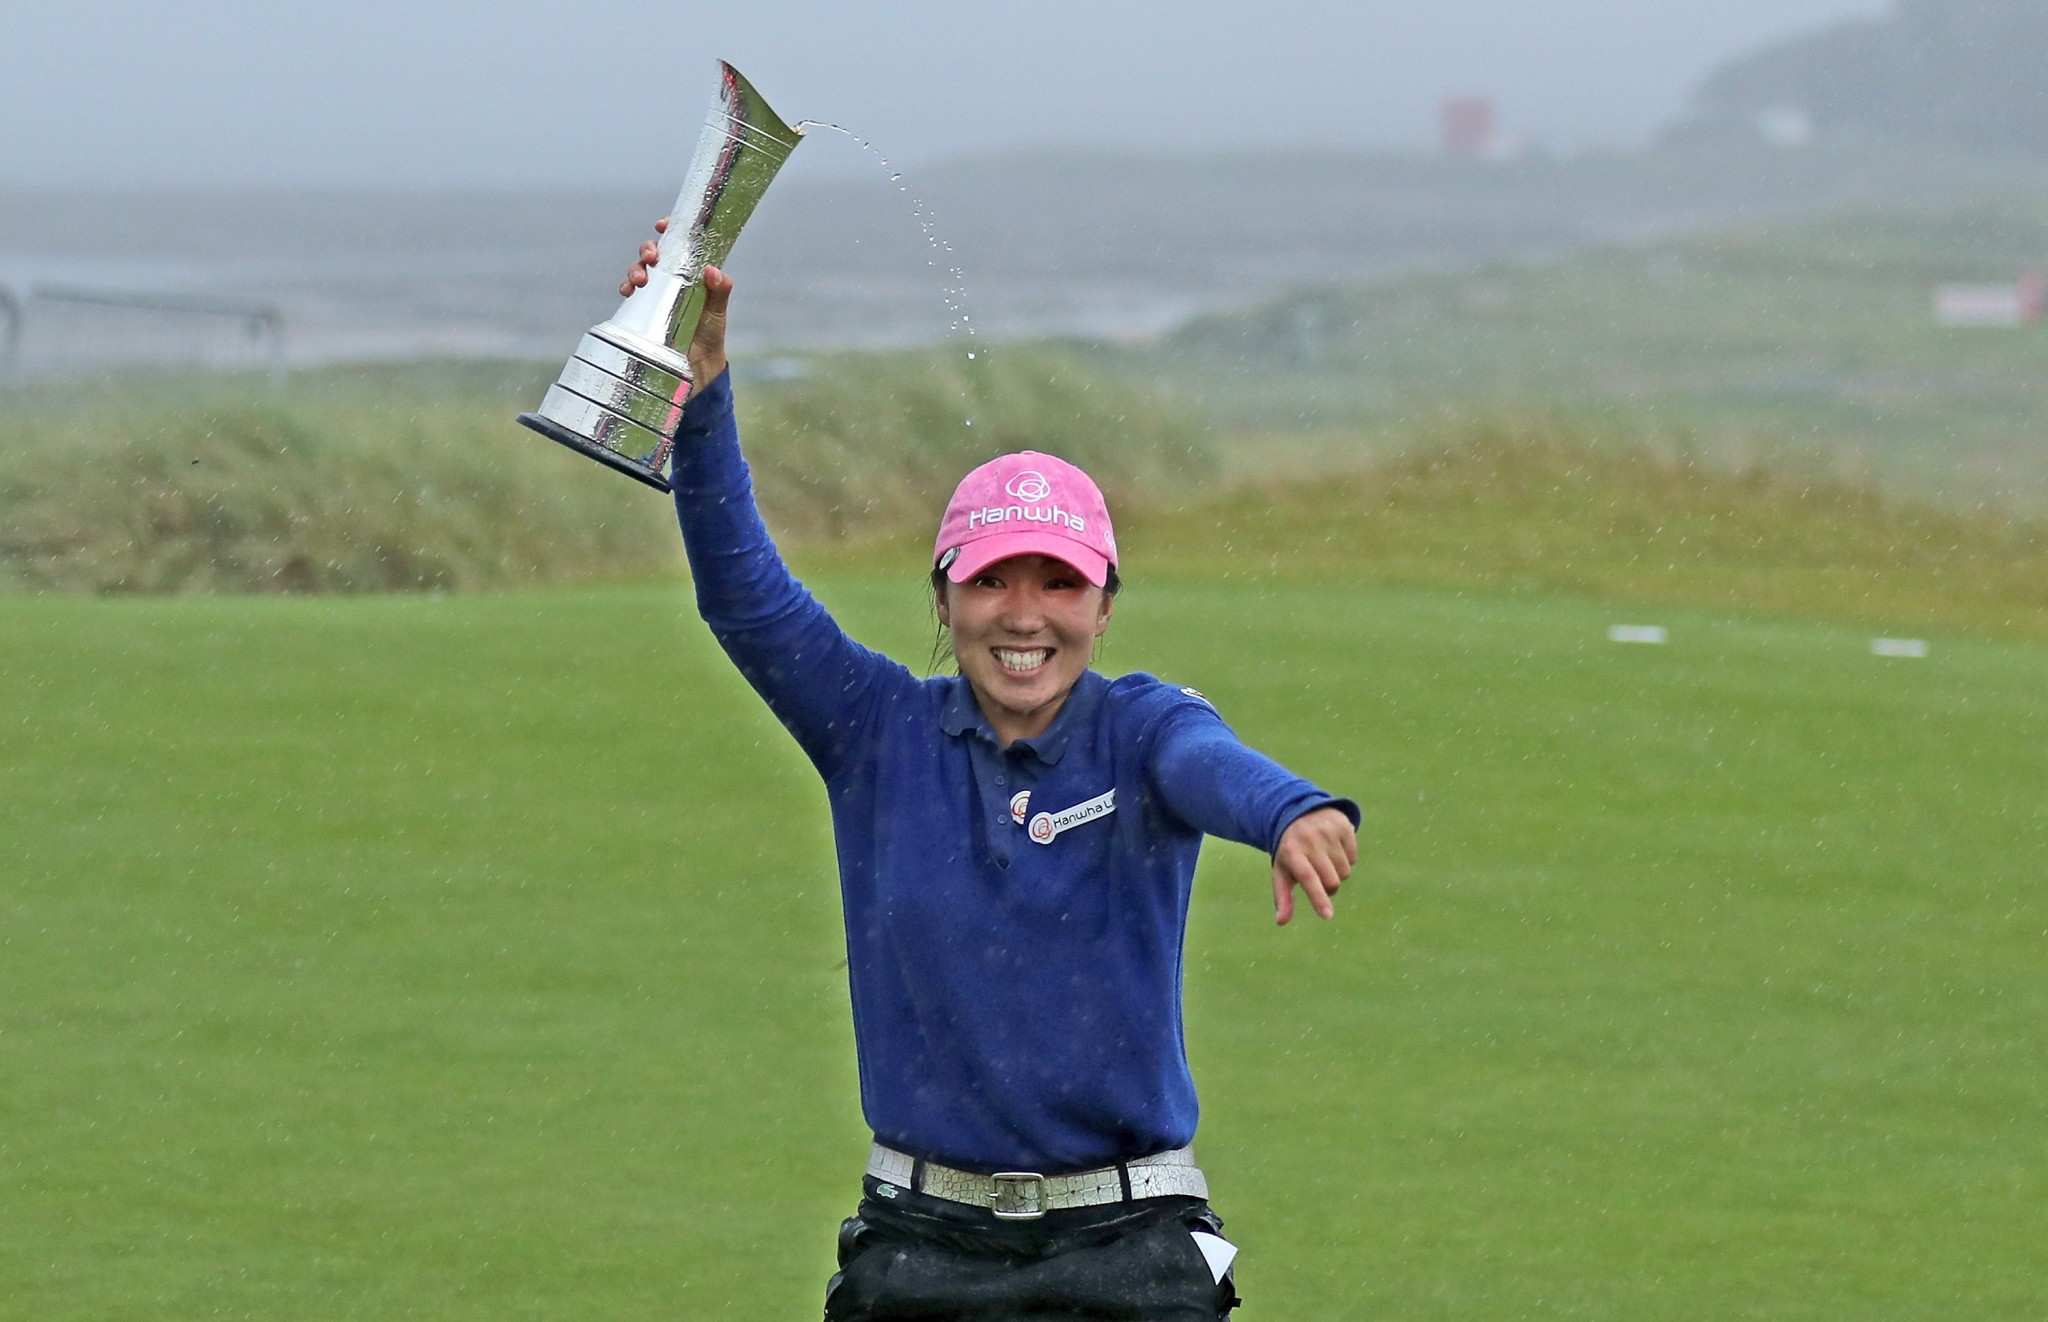 Kim In-kyung claimed victory at the Women's British Open ©Getty Images